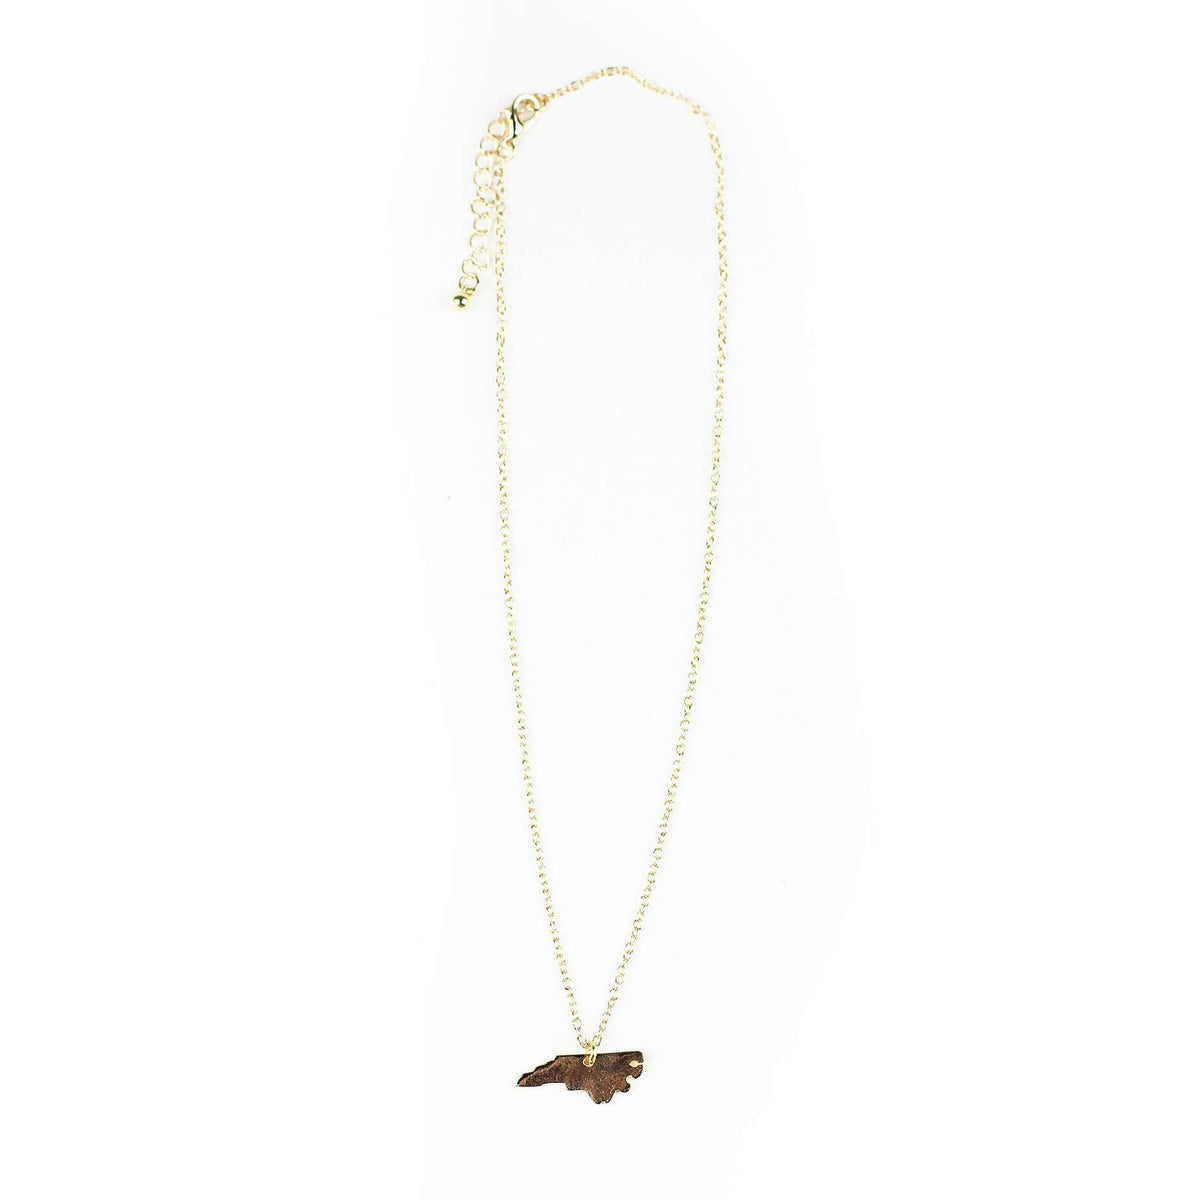 North Carolina Necklace in Gold by Country Club Prep - Country Club Prep